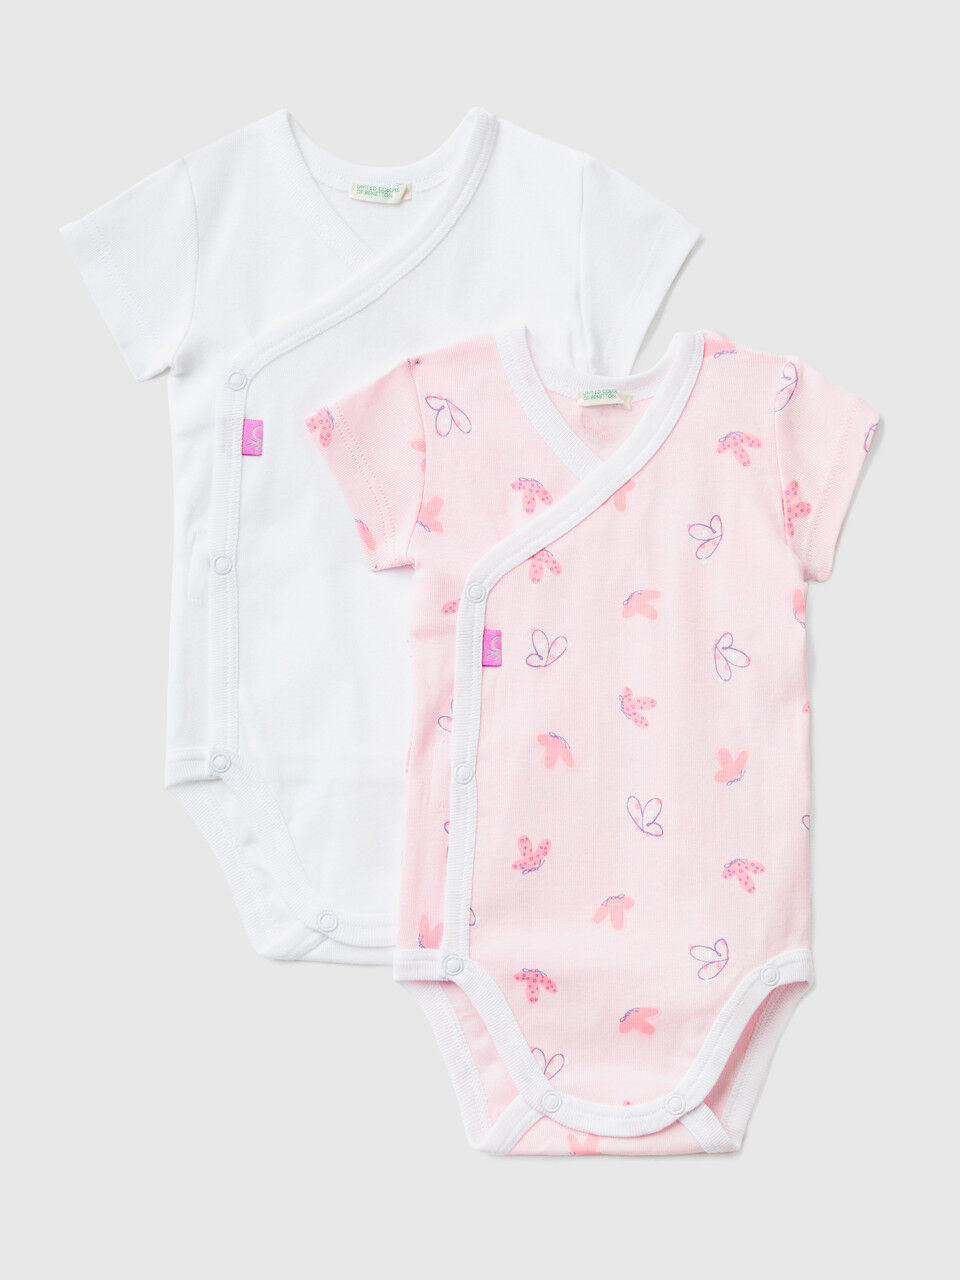 Two short sleeve bodysuits in organic cotton